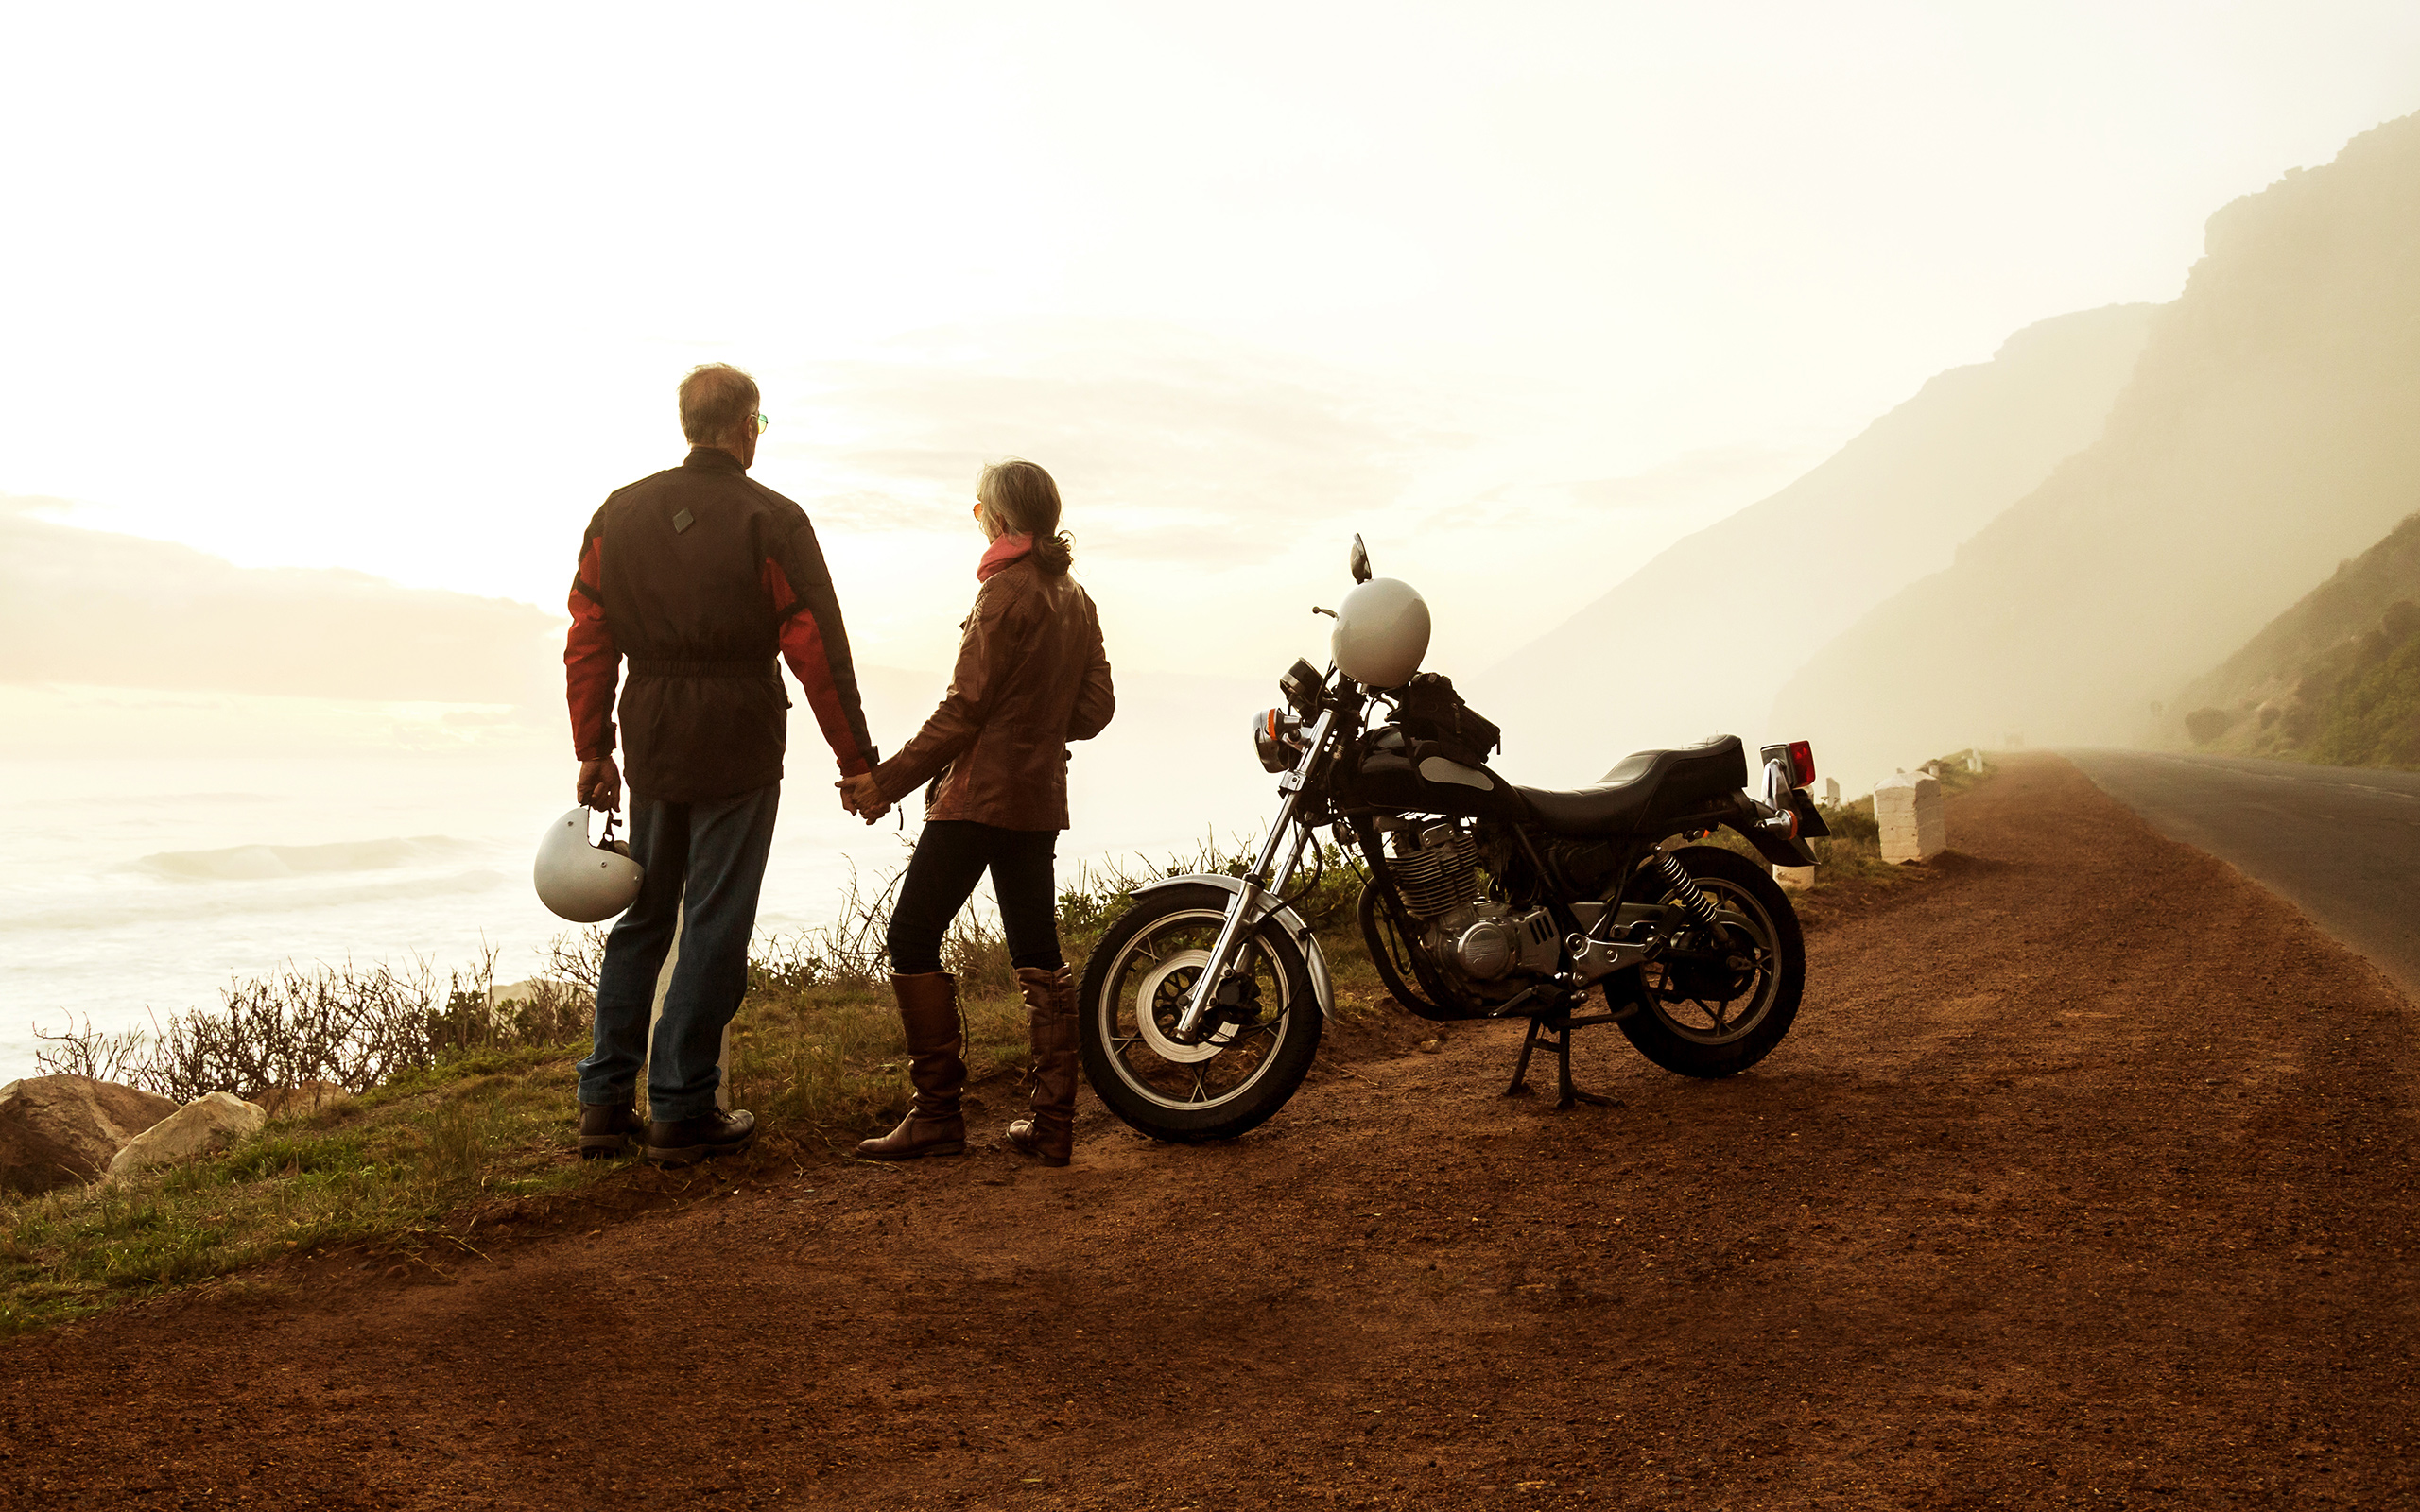 A couple stands next to a motorcycle and looks out over the horizon